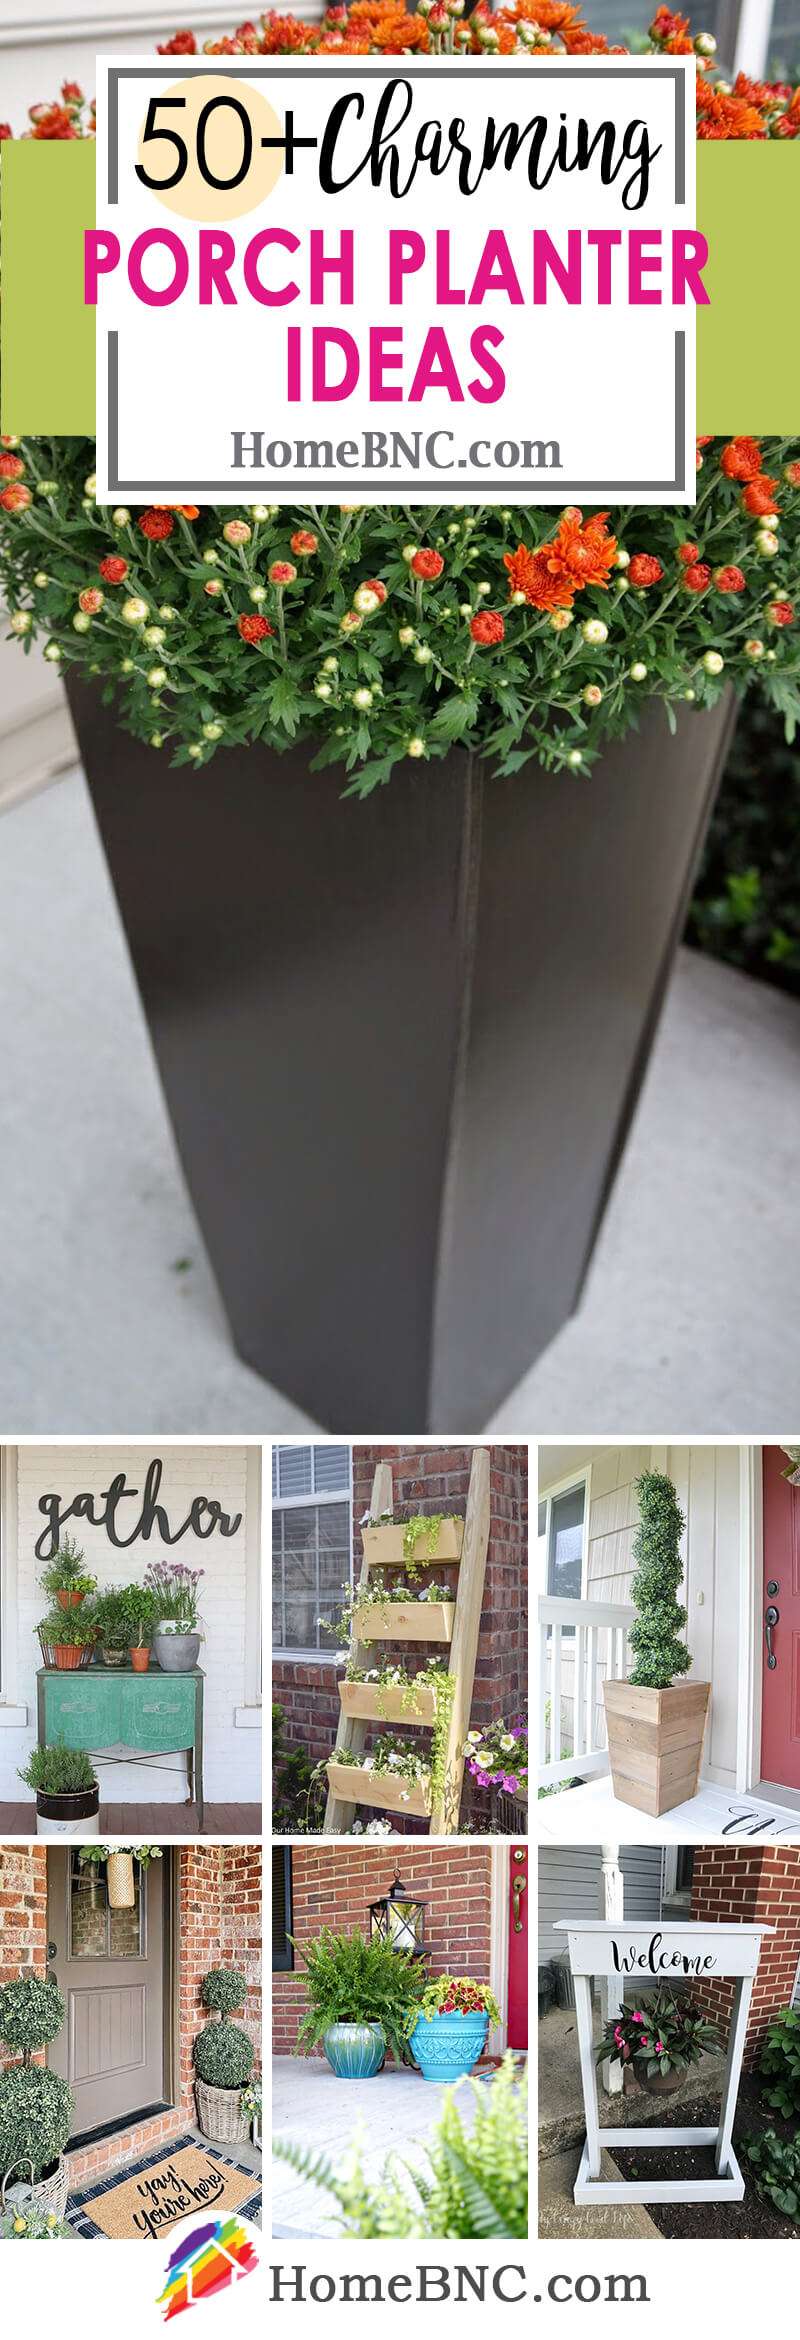  Best Porch Planter Ideas And Designs For  - Porch Potted Plant Ideas